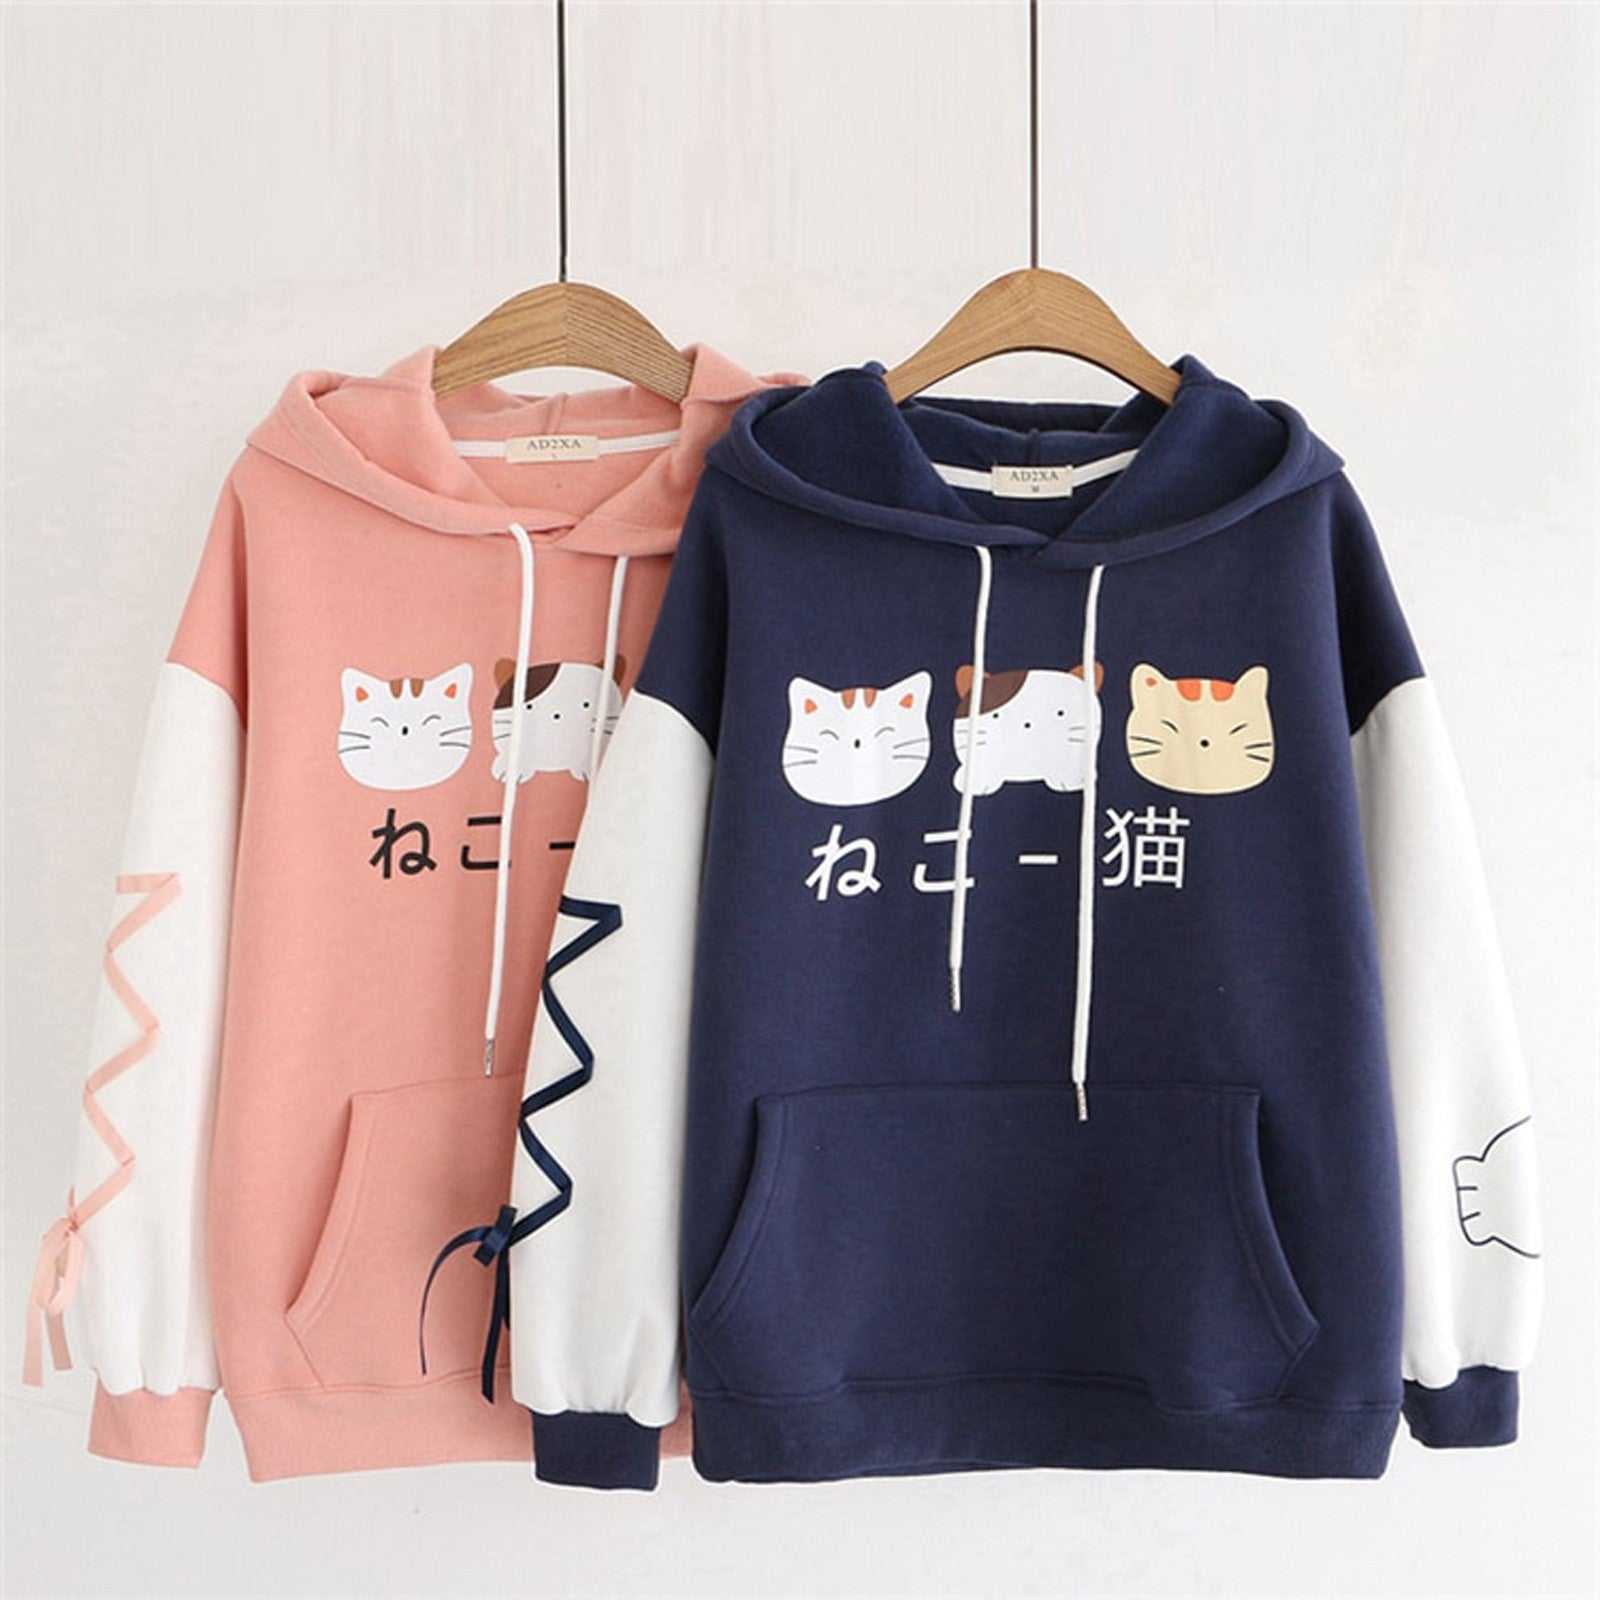 a pair of cat hoodie made for couple in harajuku style with adorable cats design in different breeds on it